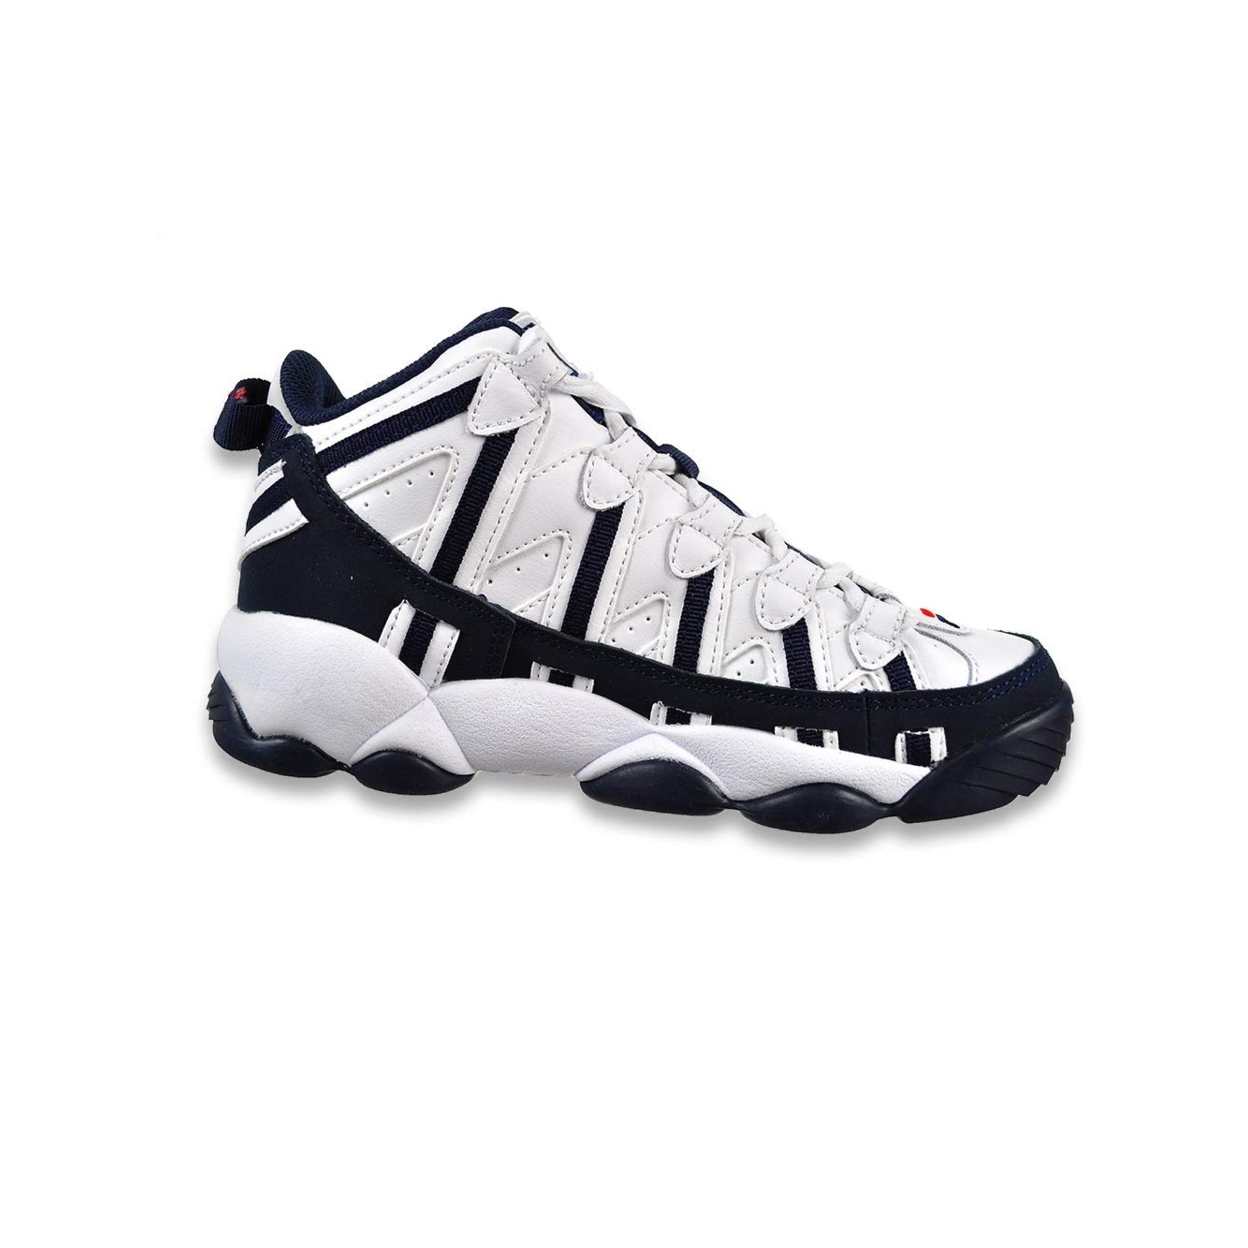 Fila Kids' Stackhouse Spaghetti Basketball Sneakers WHT/FNVY/FRED - WHT/FNVY/FRED, 6.5 Big Kid